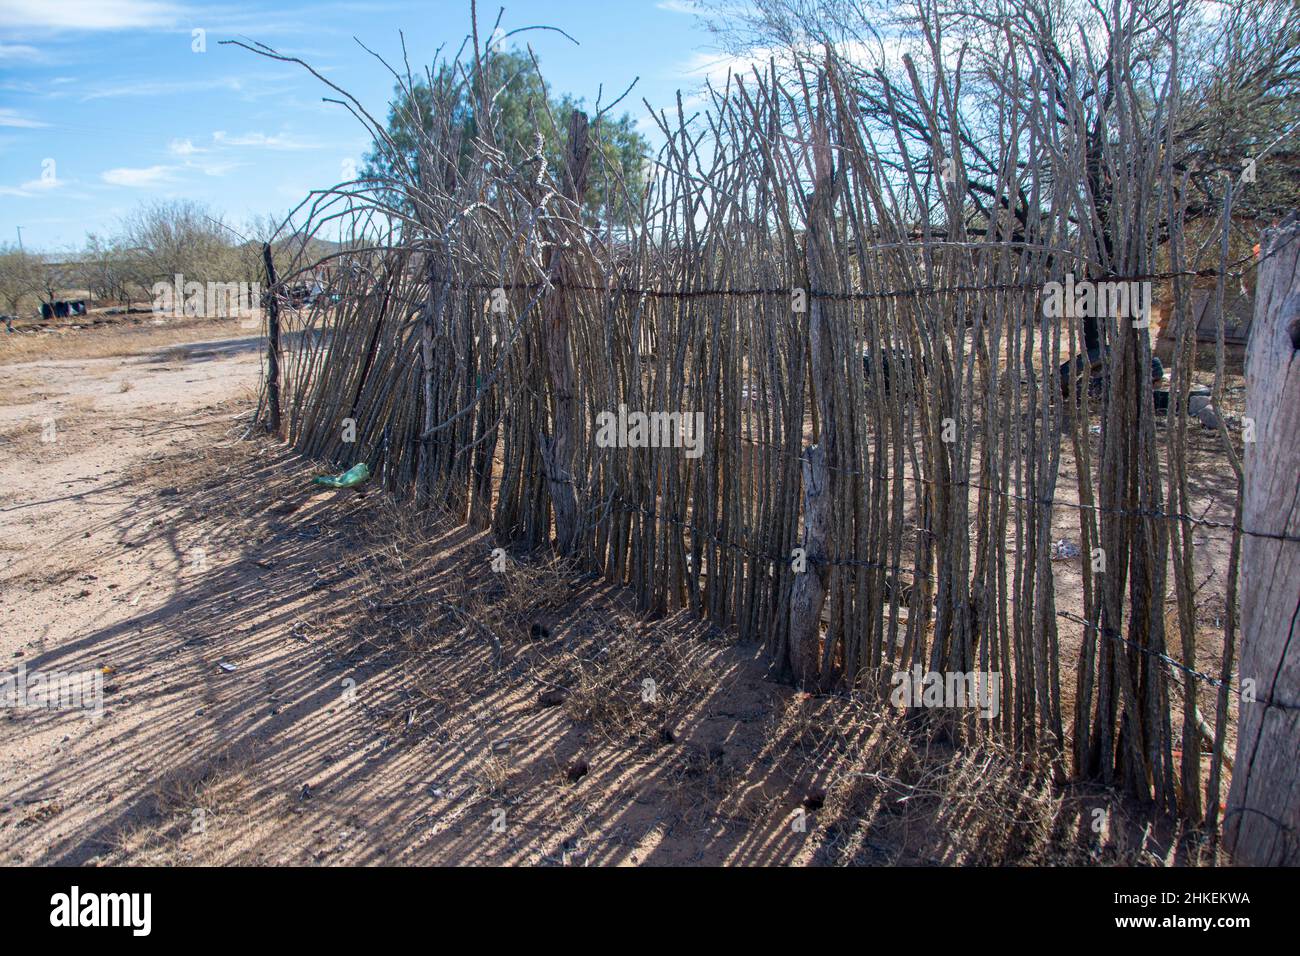 A fence made up entirely of tree branches. Off o Highway 3, Sonora, Mexico. Stock Photo